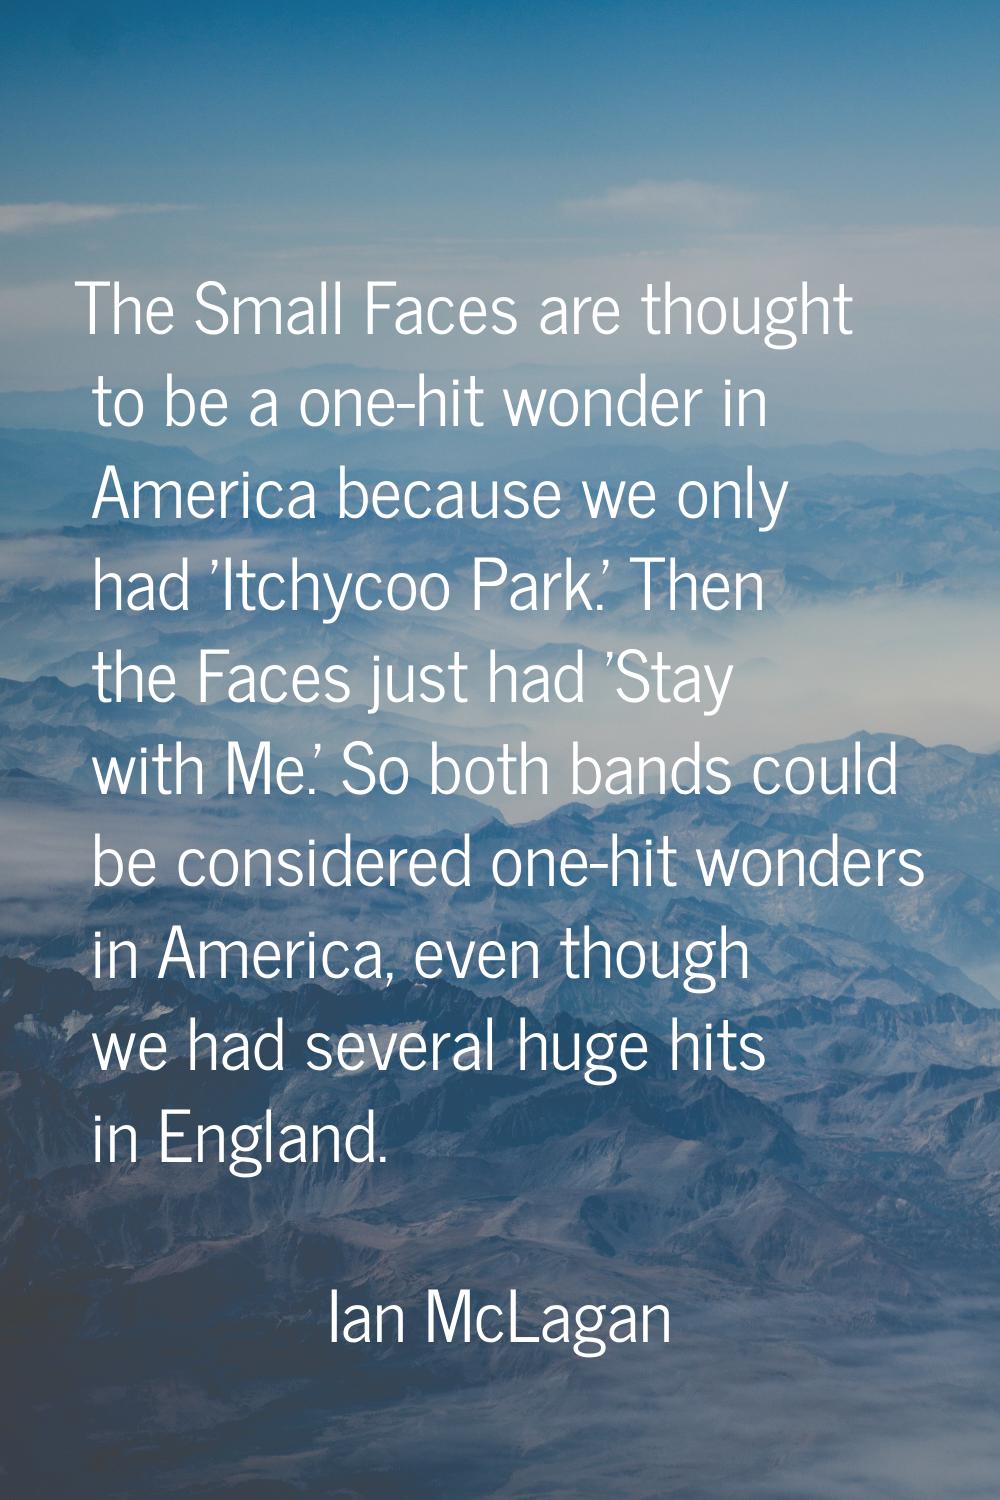 The Small Faces are thought to be a one-hit wonder in America because we only had 'Itchycoo Park.' 